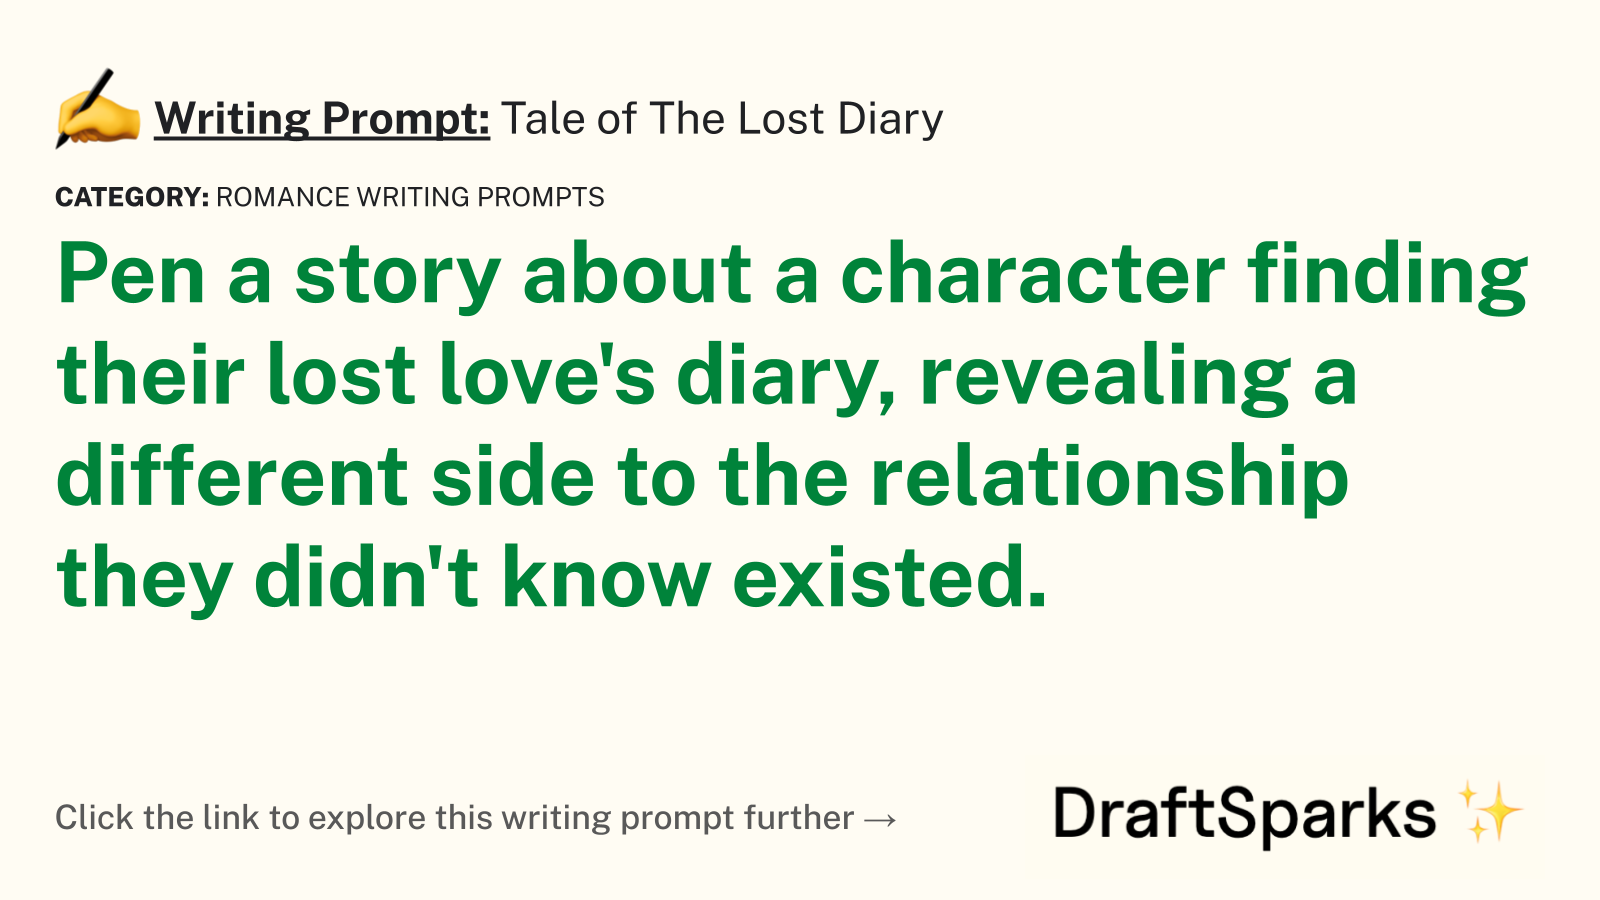 Tale of The Lost Diary